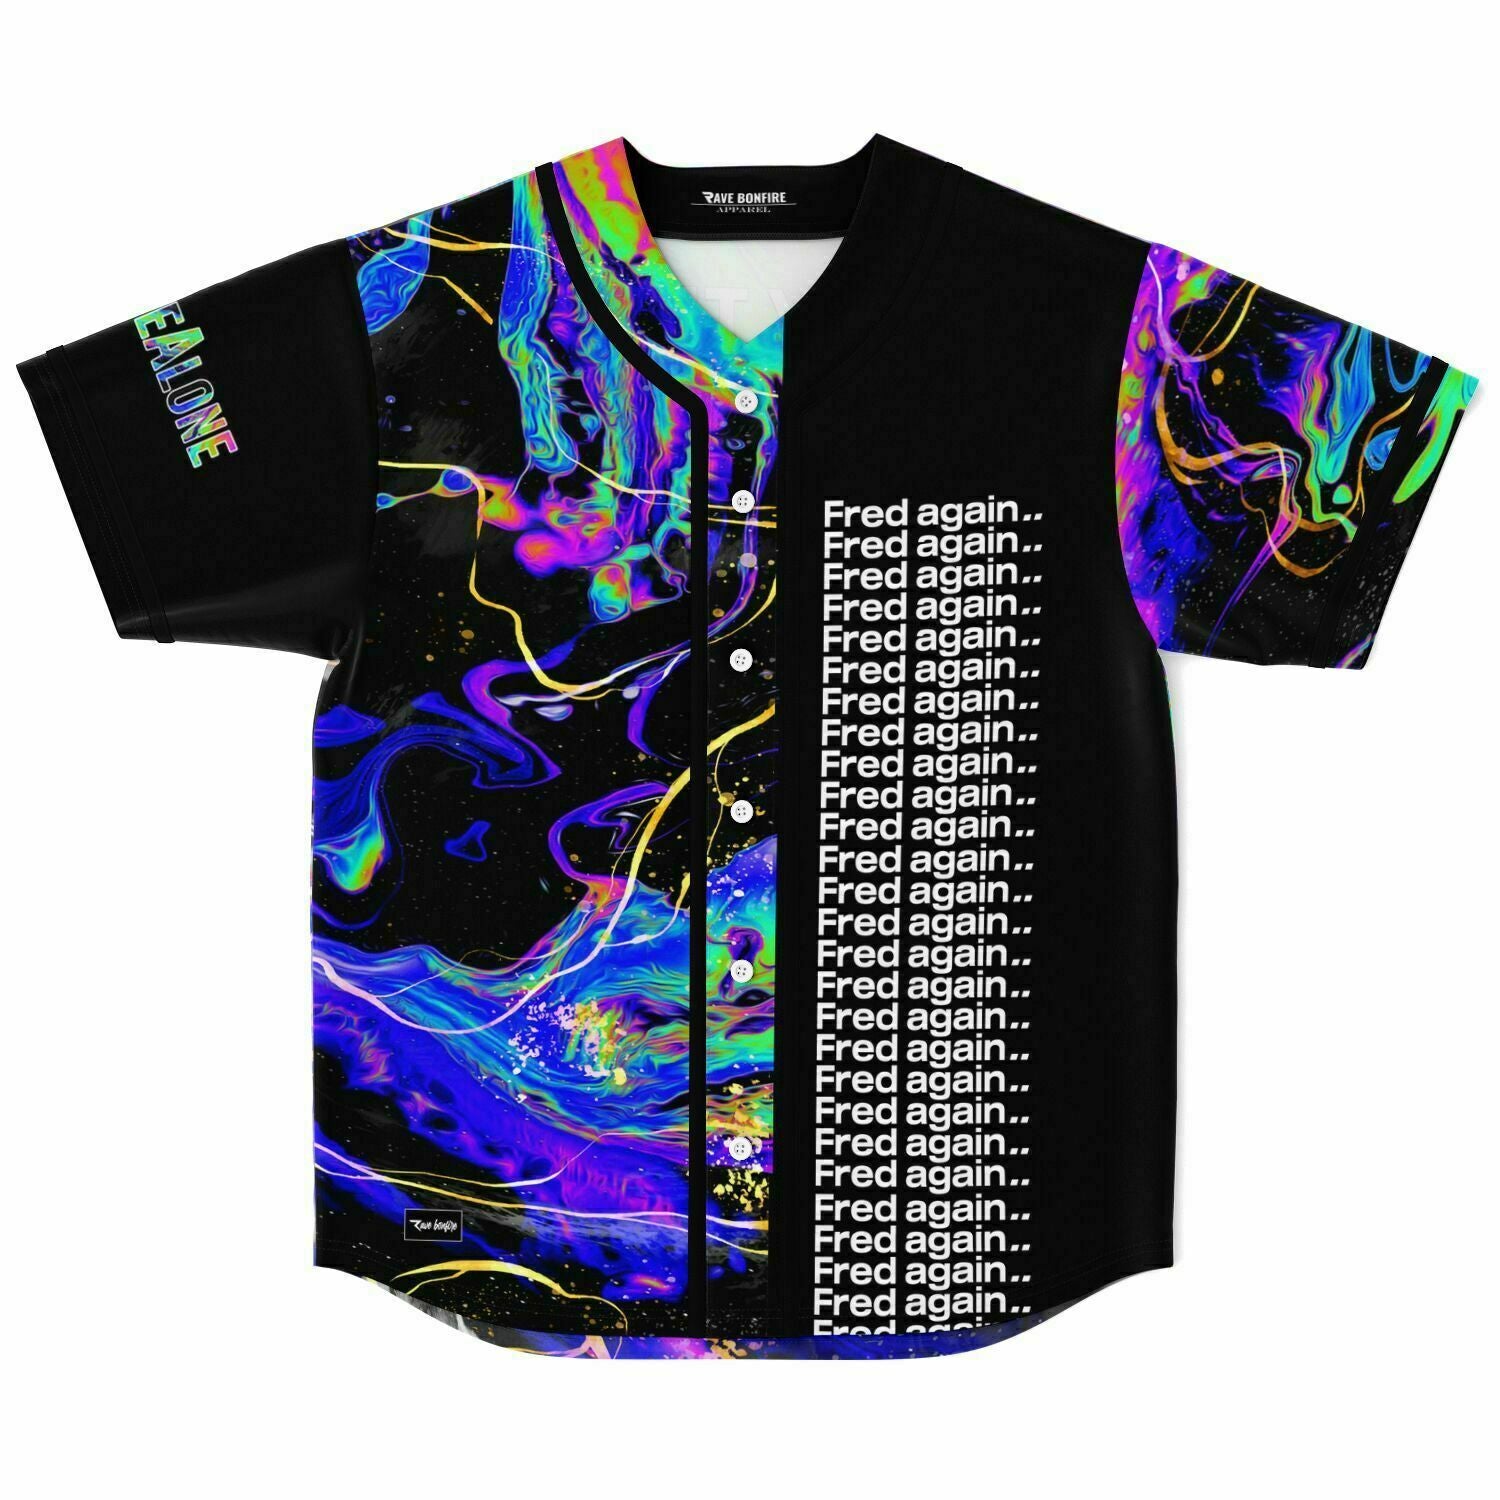 A Marud custom Baseball Jersey with a colorful design on it.